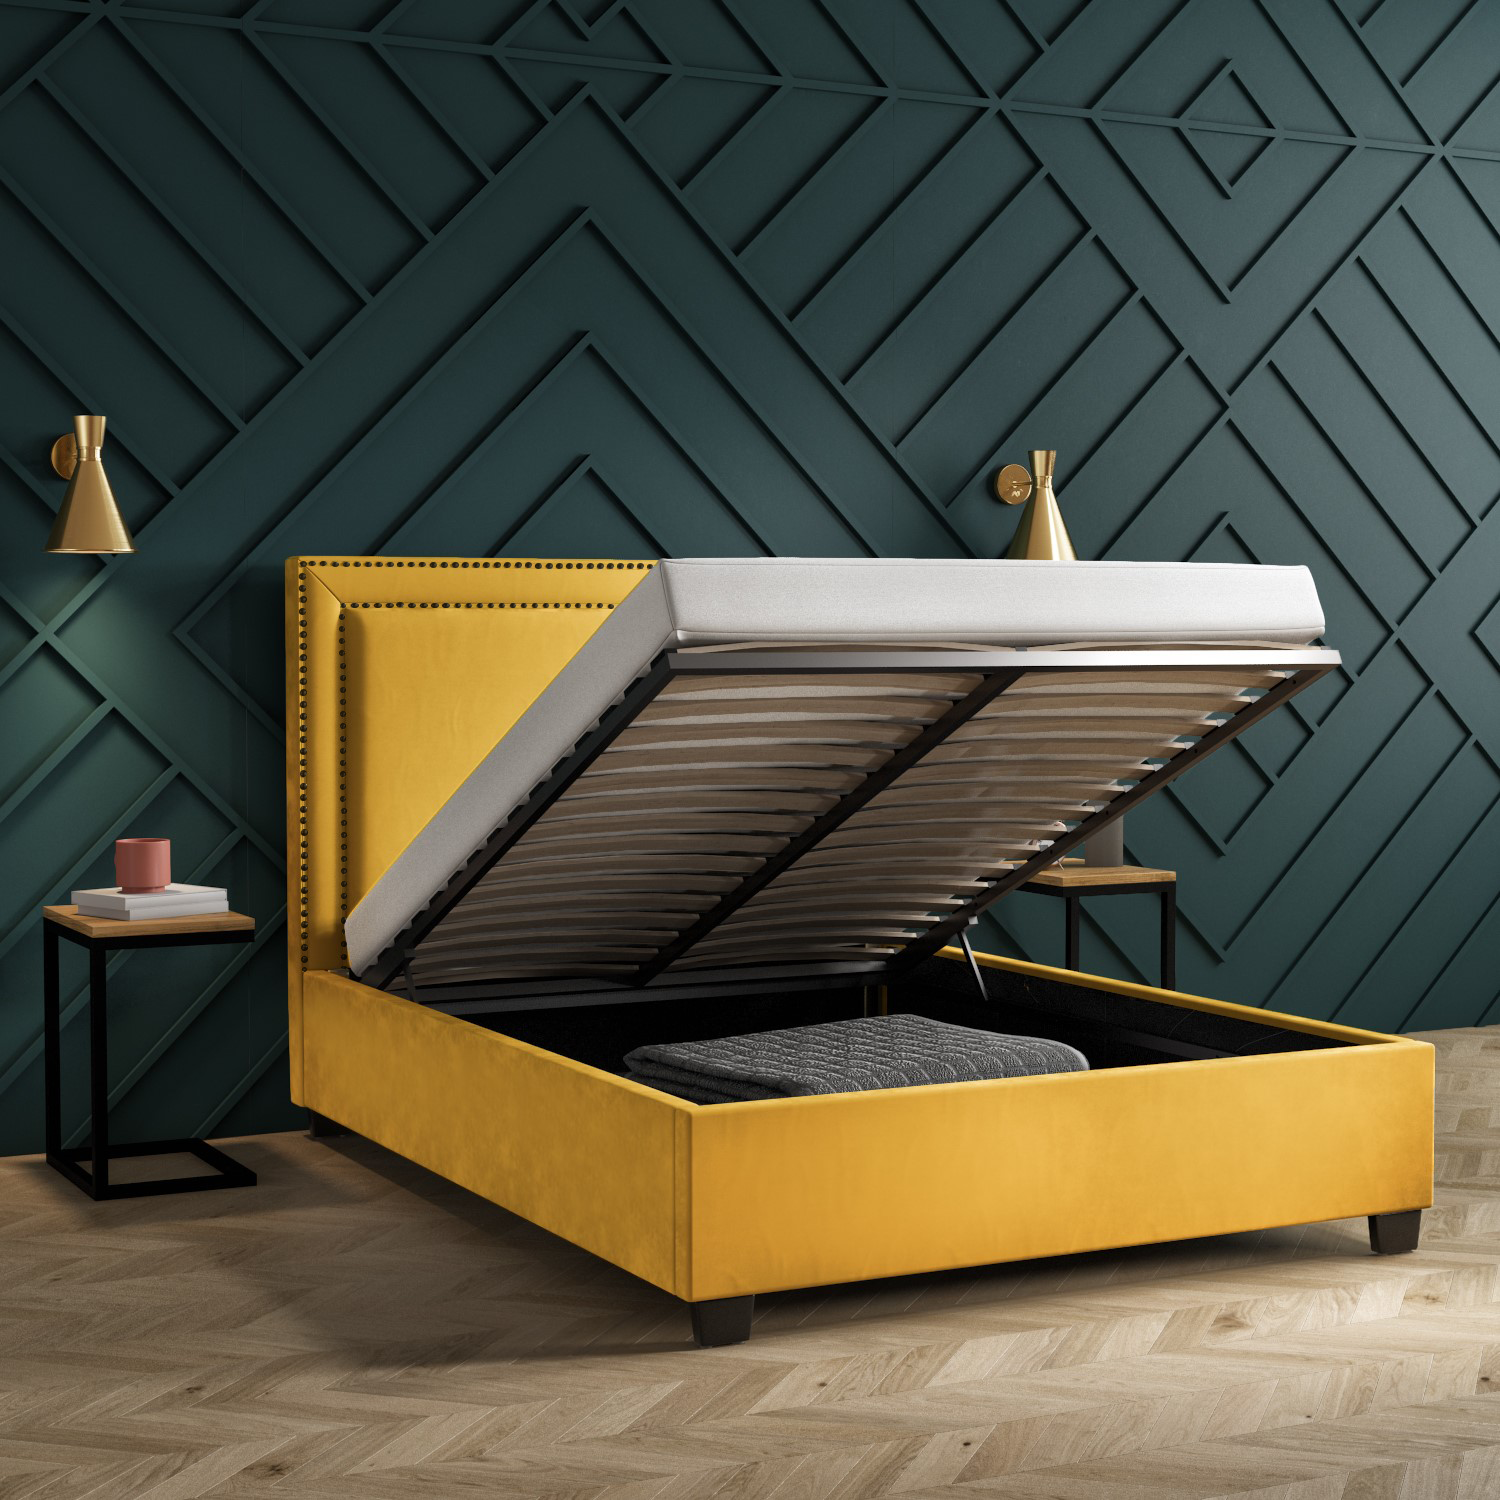 Read more about Yellow velvet king size ottoman bed with studded headboard safina